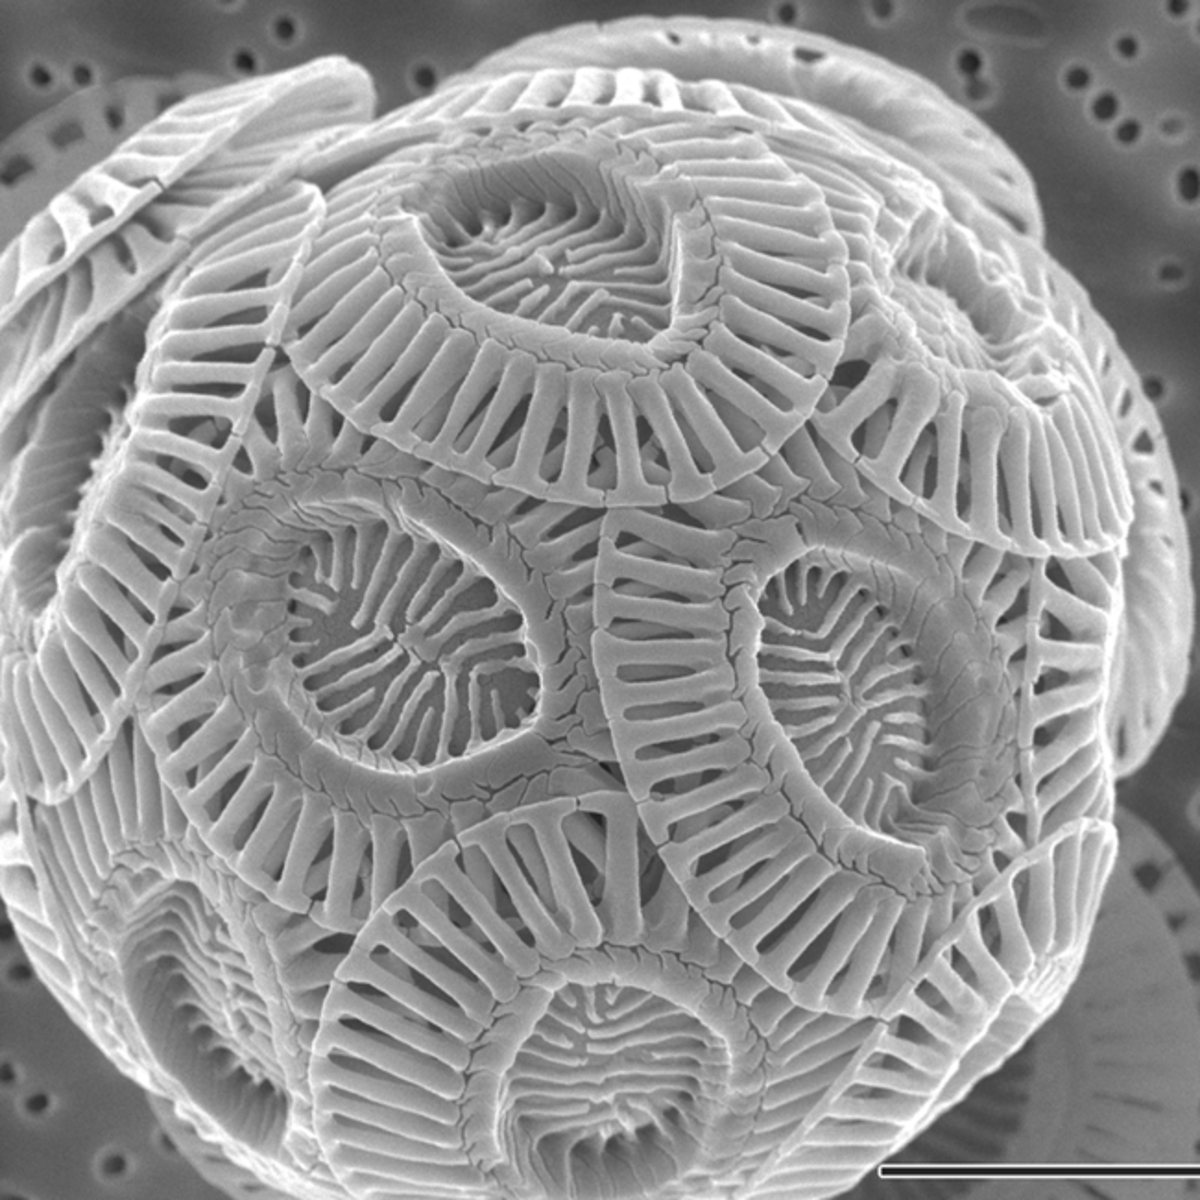 Emiliania huxleyi, single-celled marine phytoplankton that produce calcium carbonate scales (coccoliths). Chalk is 95-99% made up of these ancient organisms.